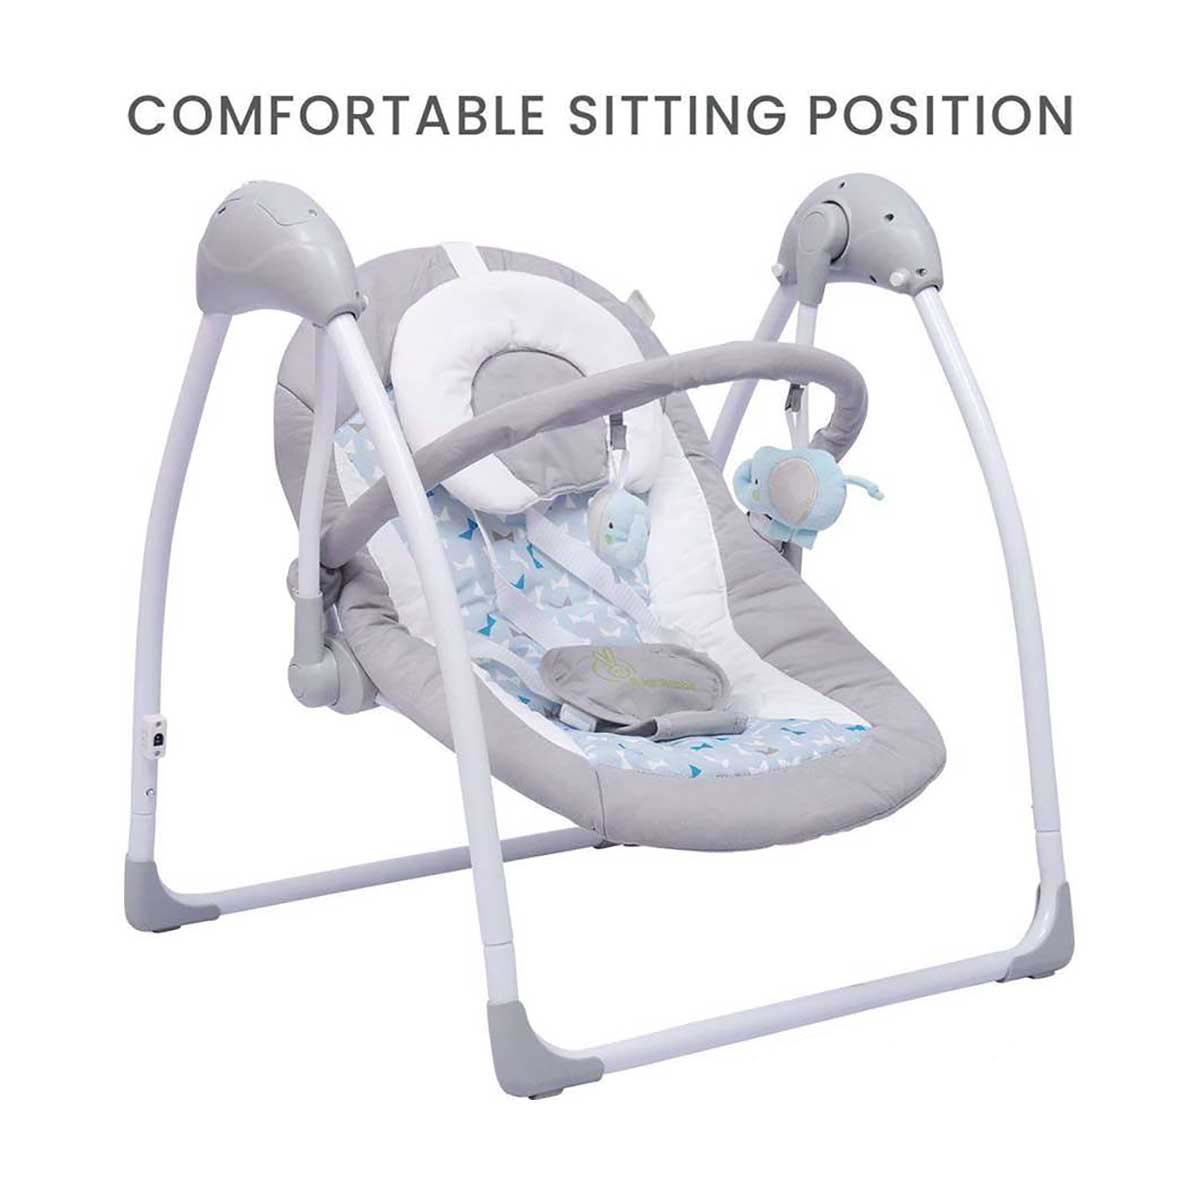 R FOR RABBIT Baby Swing Snicker Playful Automatic - Grey